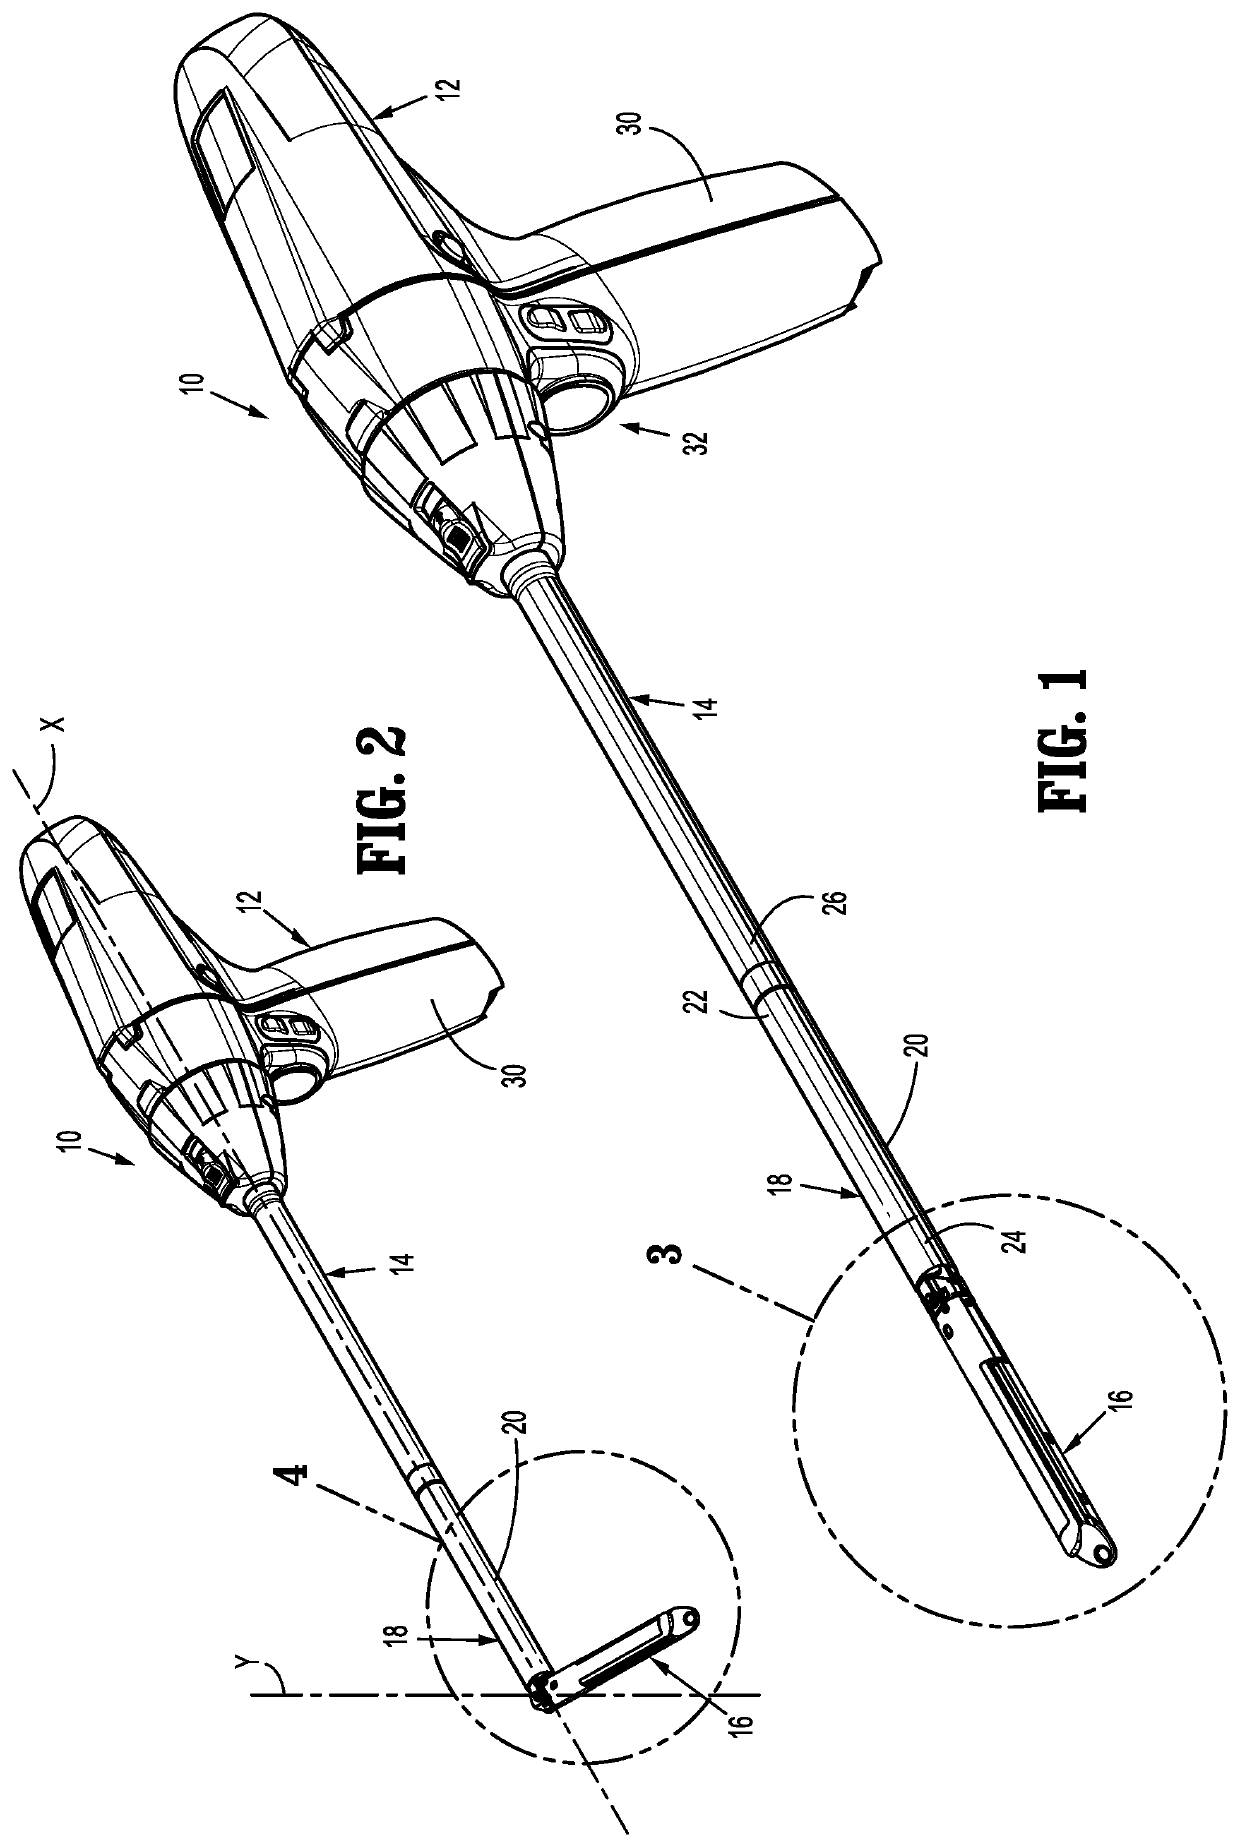 Stapling device with articulating tool assembly